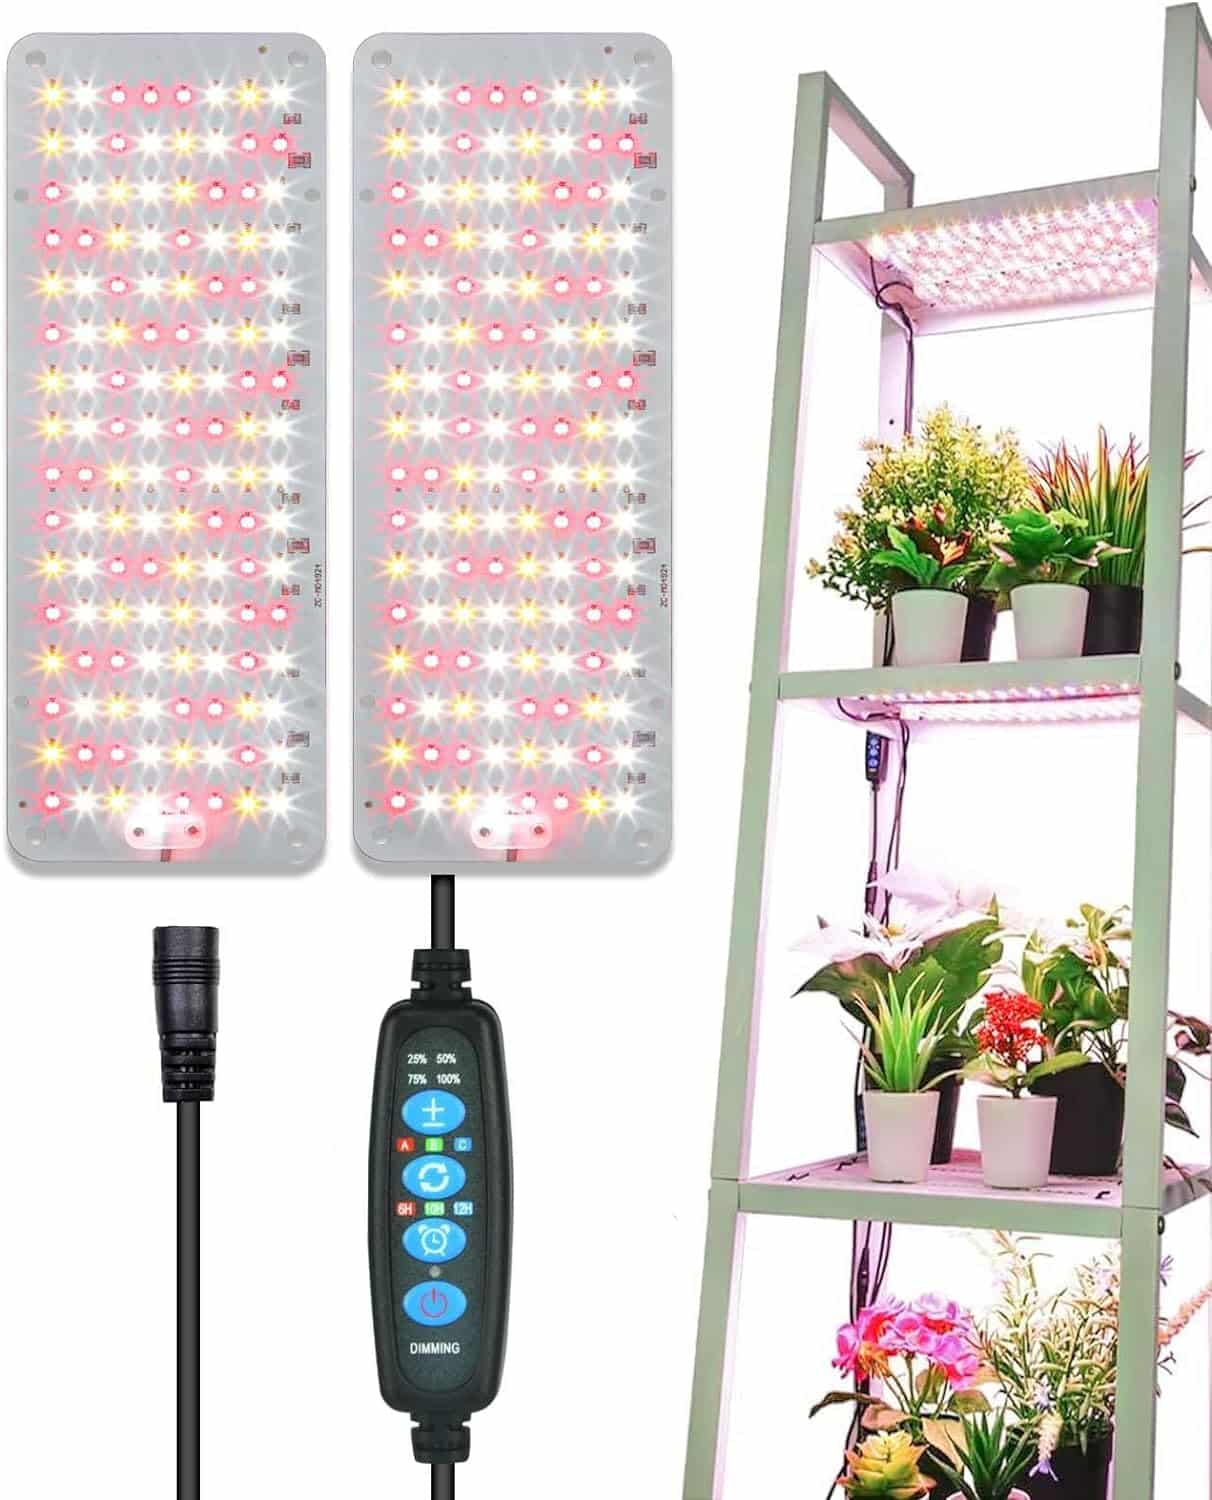 DOMMIA Grow Lights for Indoor Plants, 3 Pack Full Spectrum LED Grow Light with Auto ON  Off Timer, 132 LEDs Sunlike Plant Light for Hydroponics, Succulents  More, Easy to Assemble